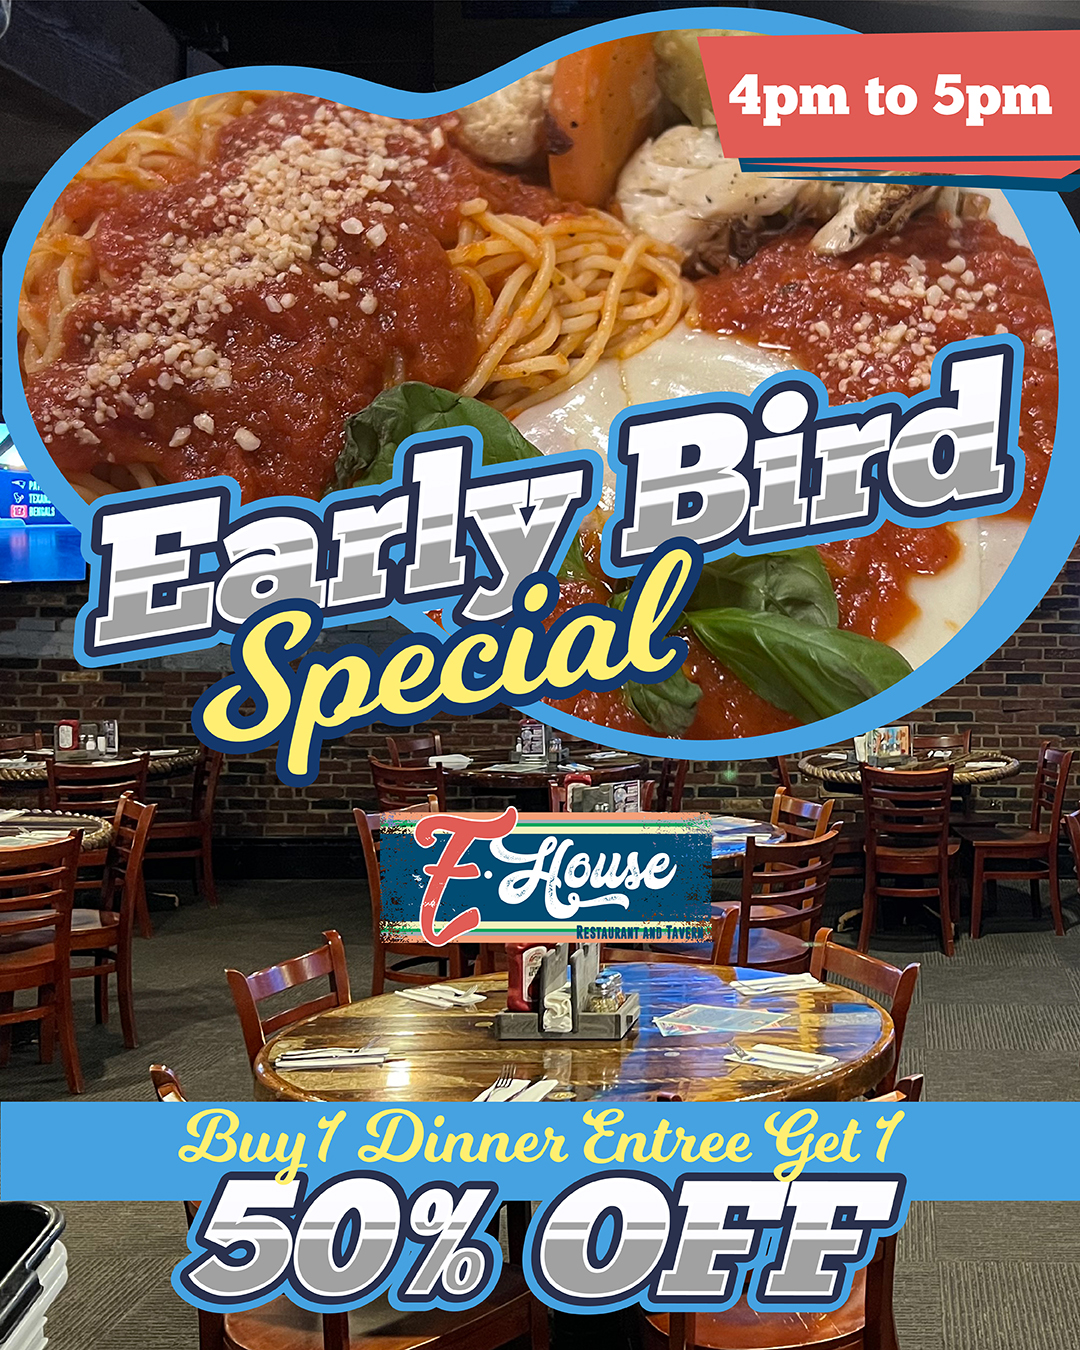 A flyer for the early bird special.